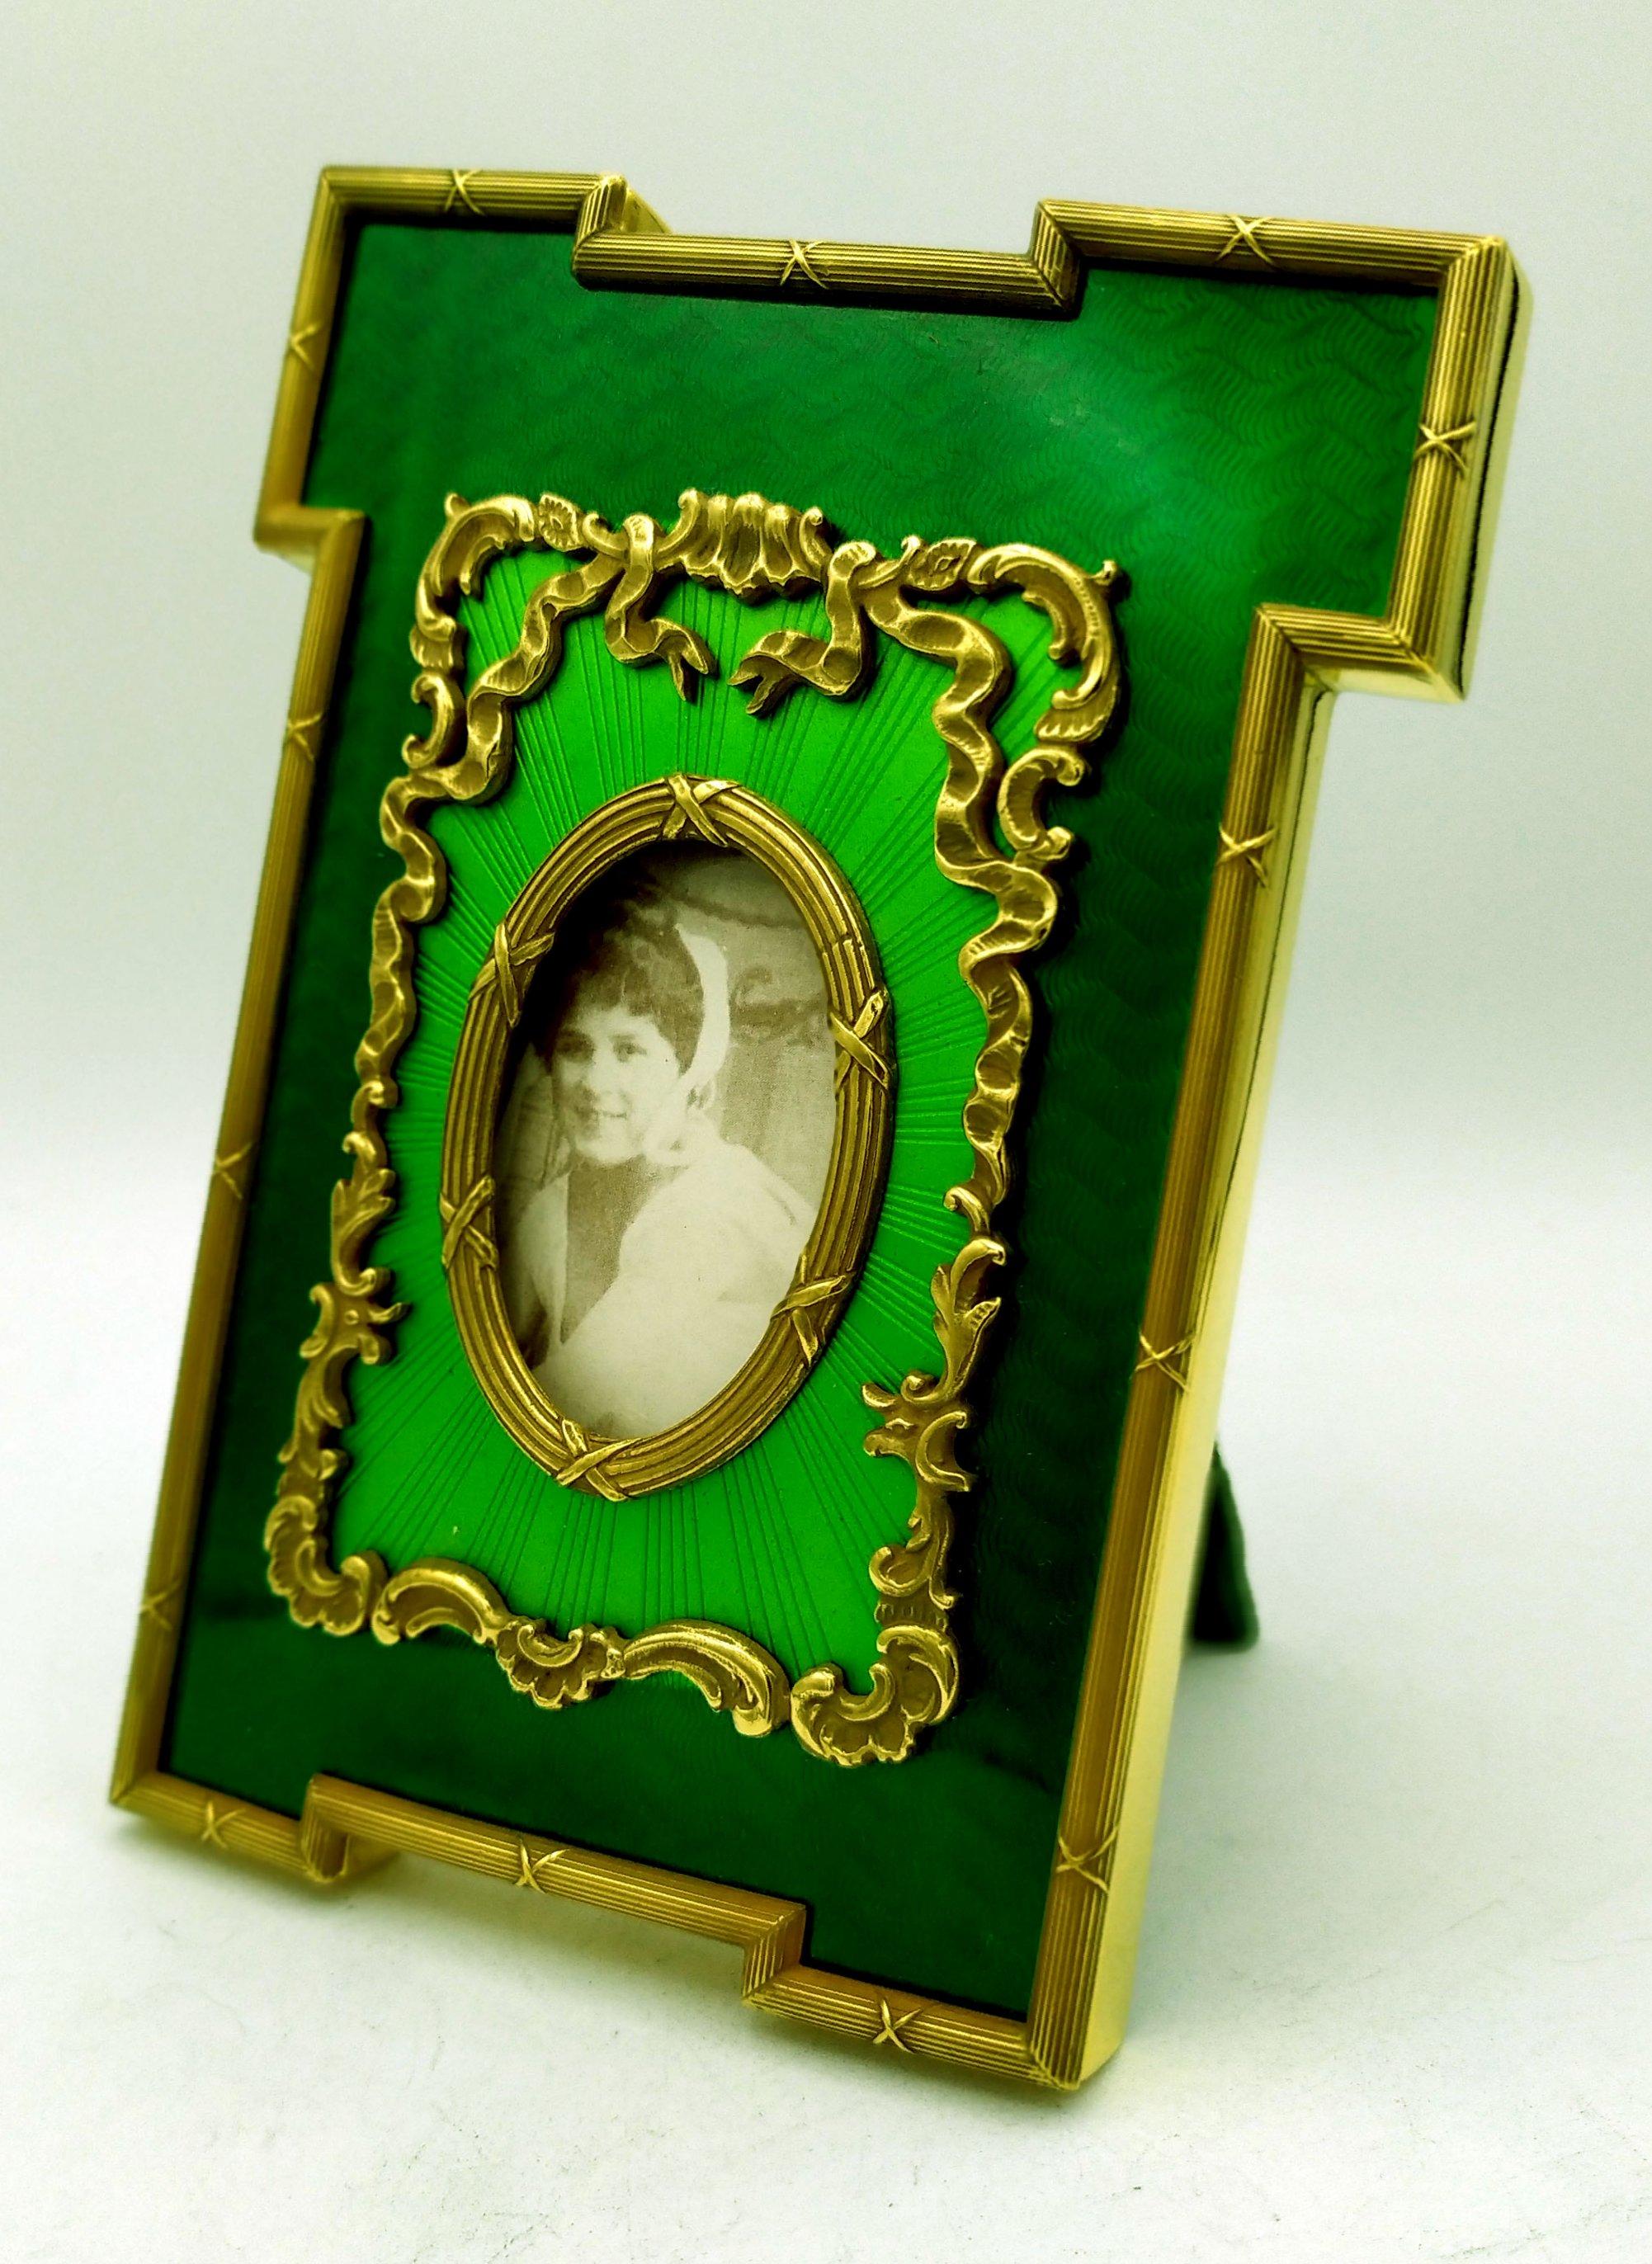 This important Picture Frame Green is in 925/1000 sterling silver gold plated 24 carats. It is rectangular shaped photo frame.
The surface of this Picture Frame Green is fired enamel translucent  on guilloche and French Empire Napoleon III style